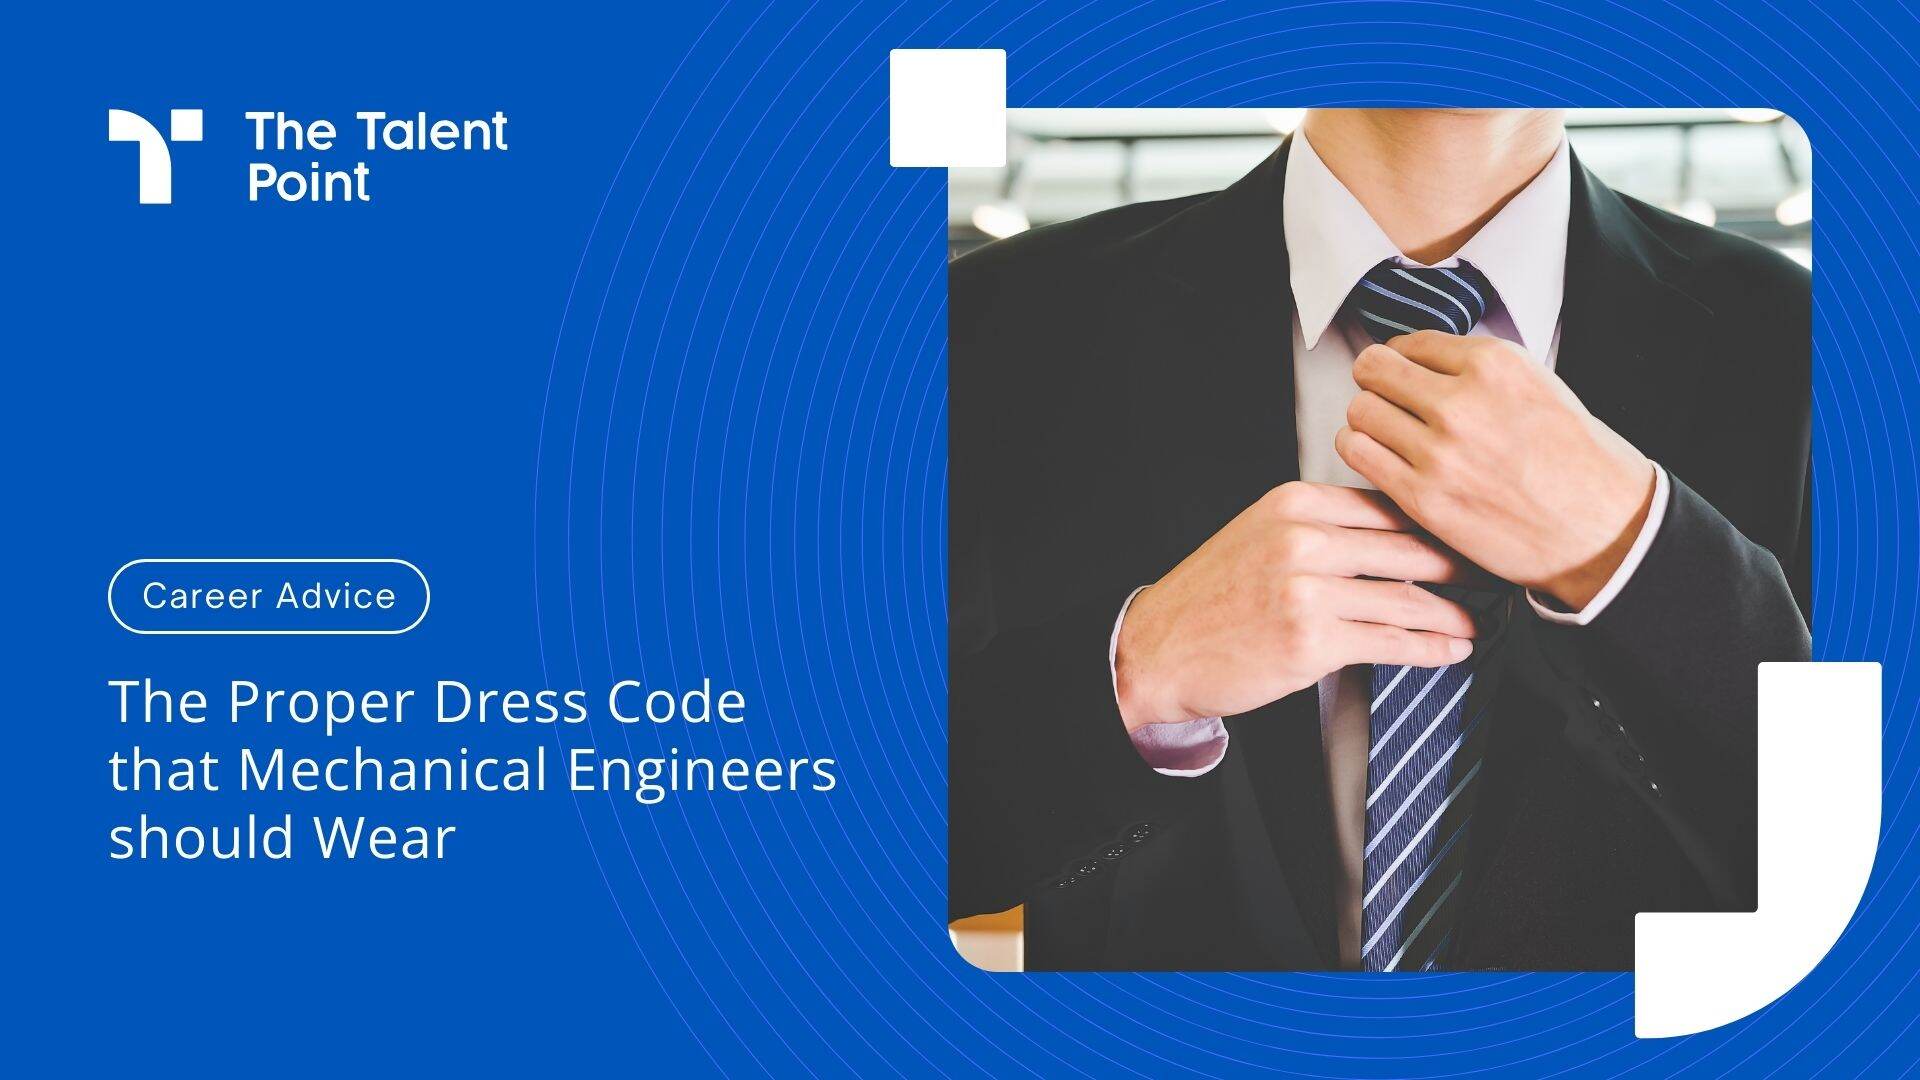 The Proper Dress Code that Mechanical Engineers should Wear